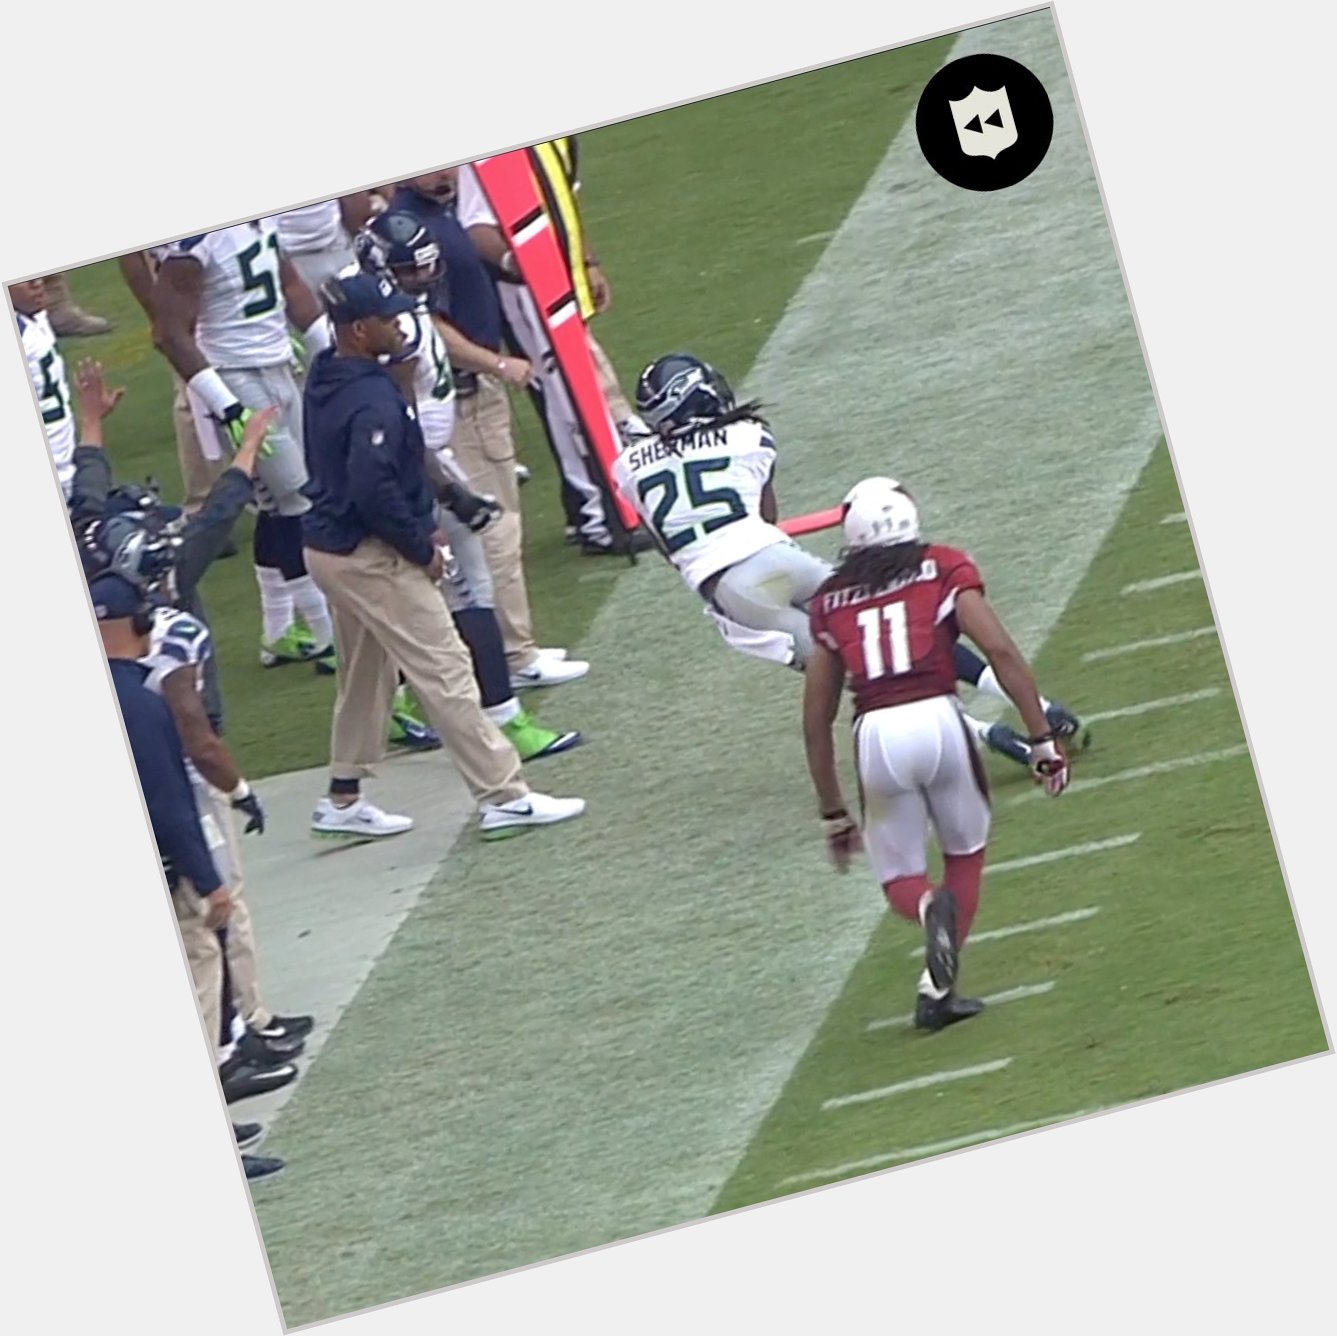 Richard Sherman showing off his WR skills on the sideline. (Sept. 9, 2012)

Happy birthday,  